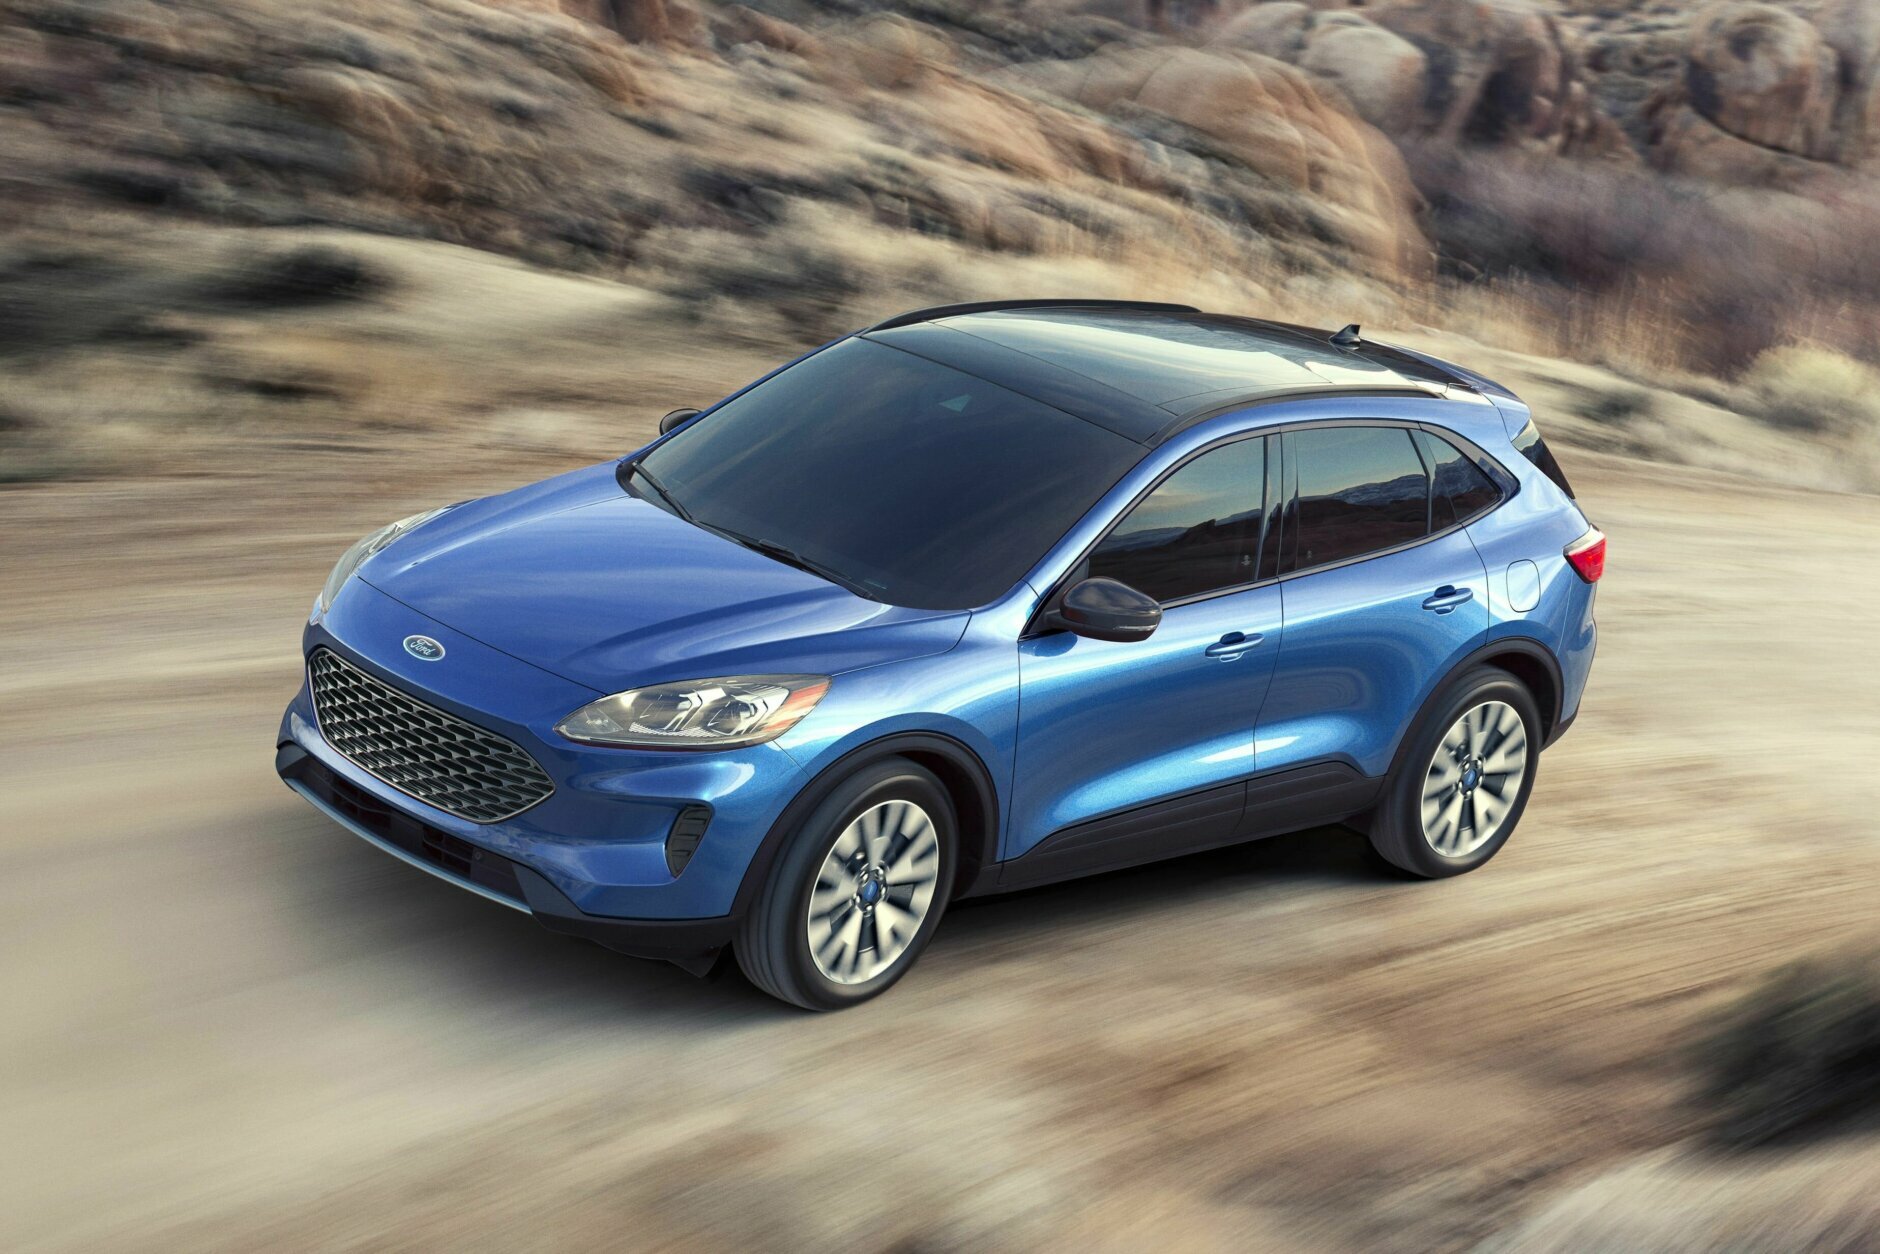 <p><strong>Best SUV for teens $20,000 to $25,000:</strong> The Ford Escape</p>
<p>“If you live in an area where you might be on a back road or need some all-wheel drive a bit more ground clearance,” you might be in the market for an SUV.</p>
<p>One of Ford&#8217;s selling points, she said, is the MyKey feature that lets the car know that your teen is driving. “You can set a top speed; you can set it up so when that it’s in use, the radio won&#8217;t turn on until all the seat belts are buckled.”</p>
